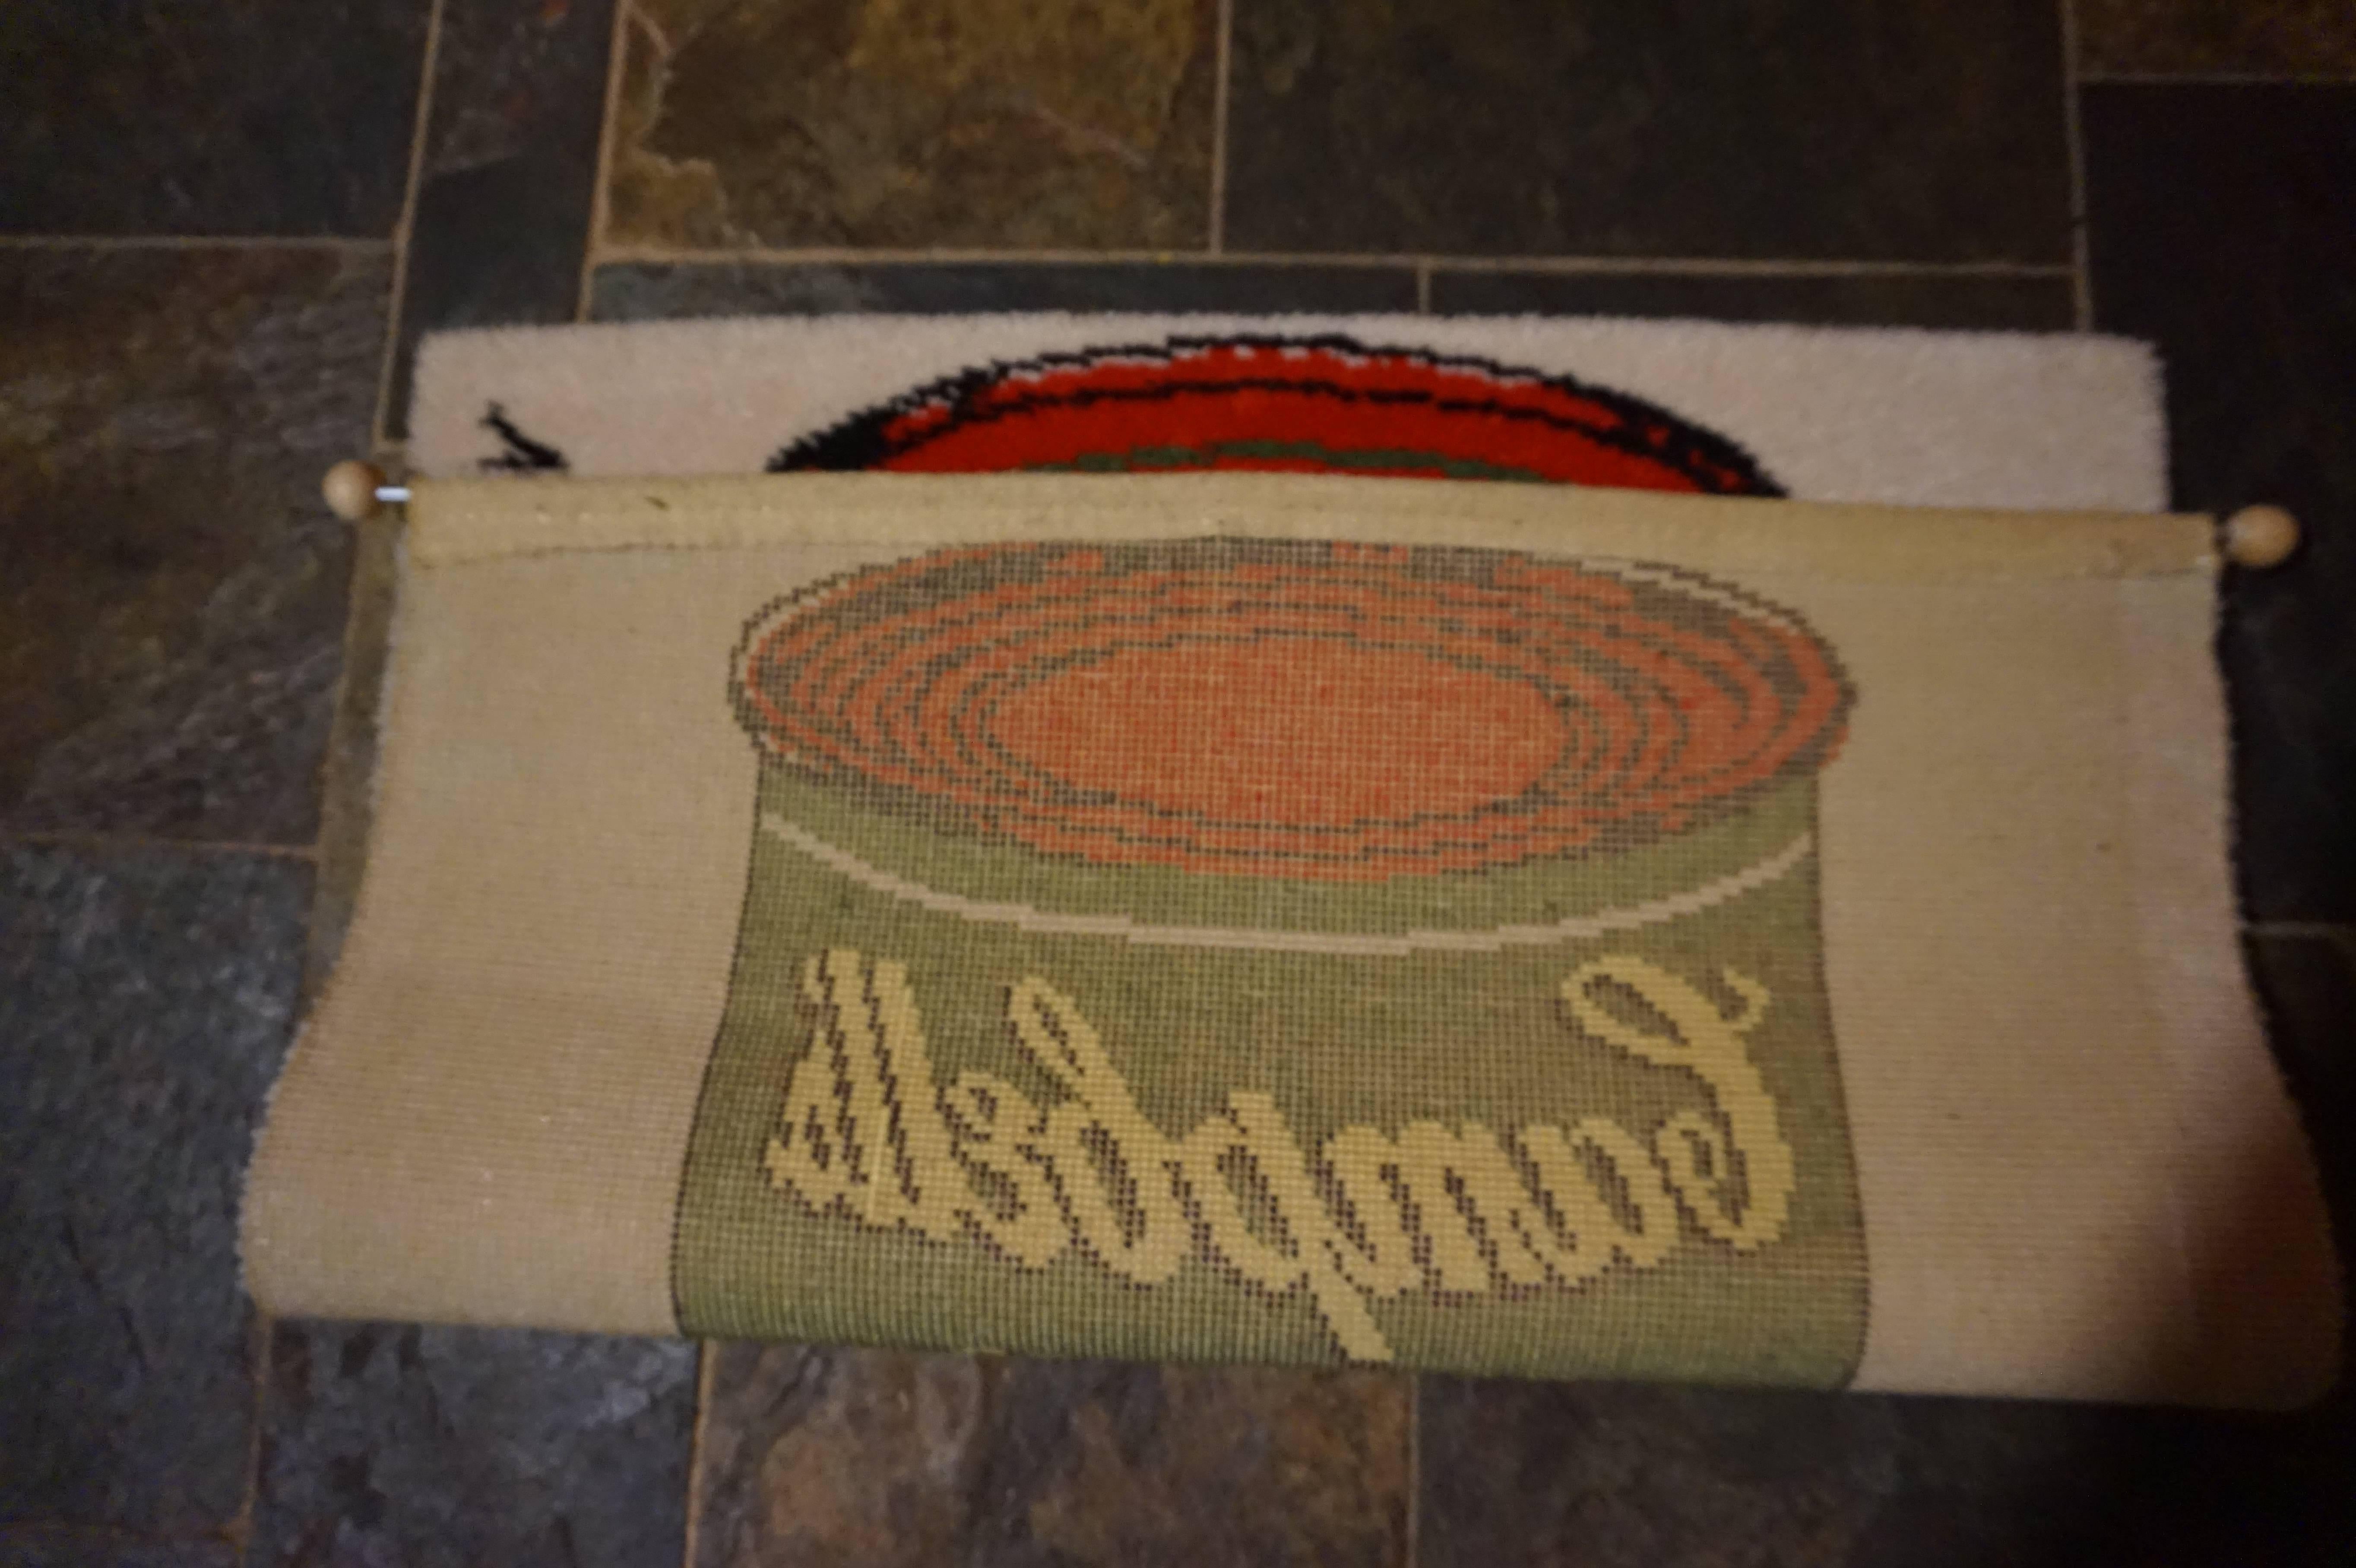 Fabulous Andy Warhol Campbell’s Soup Can Rug / Tapestry Mid-Century Modern In Excellent Condition For Sale In Pemberton, NJ